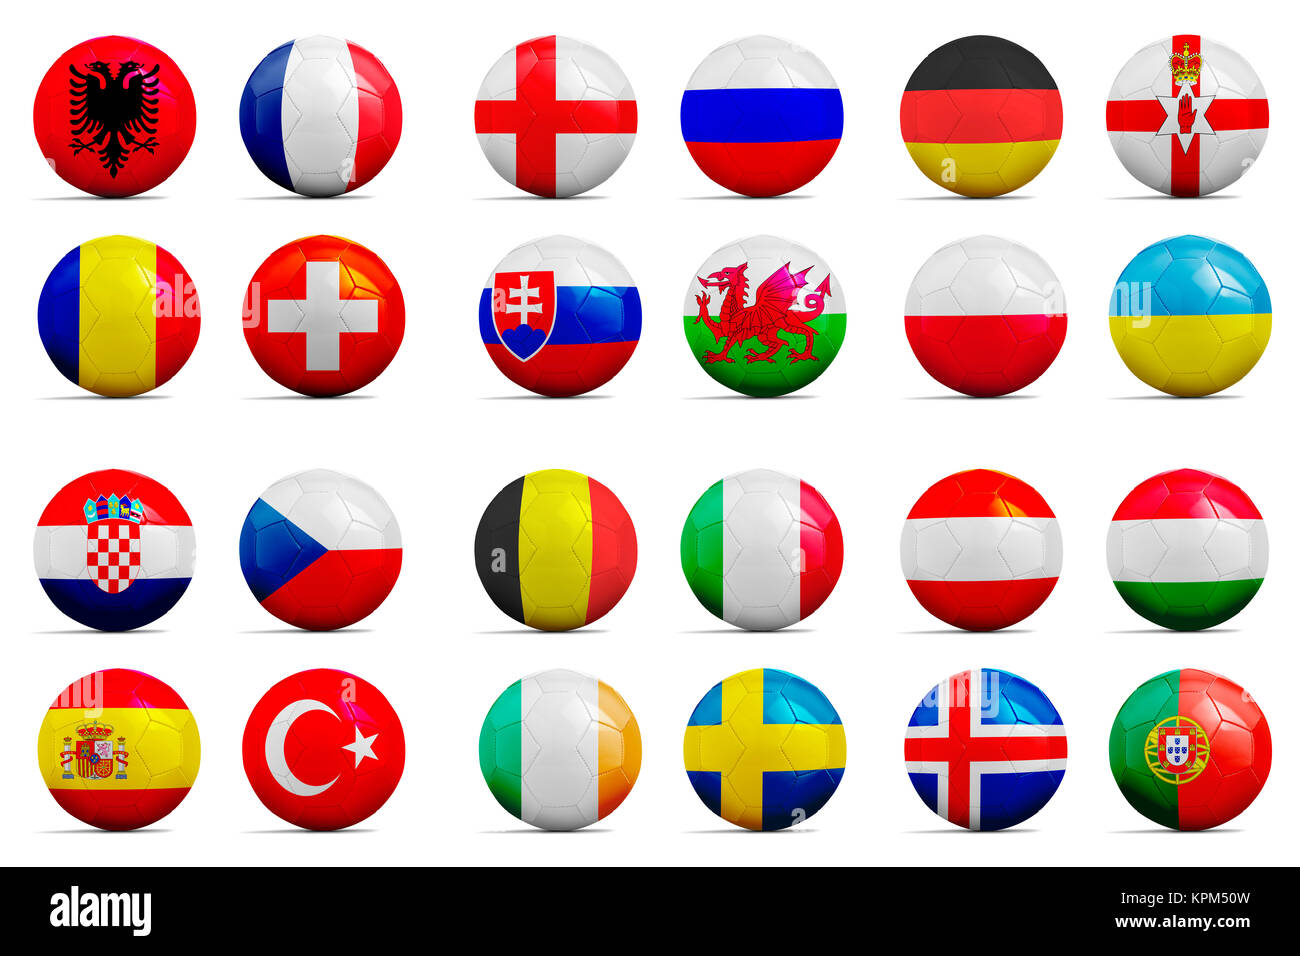 Soccer balls with groups team flags, Football Euro 2016. Stock Photo